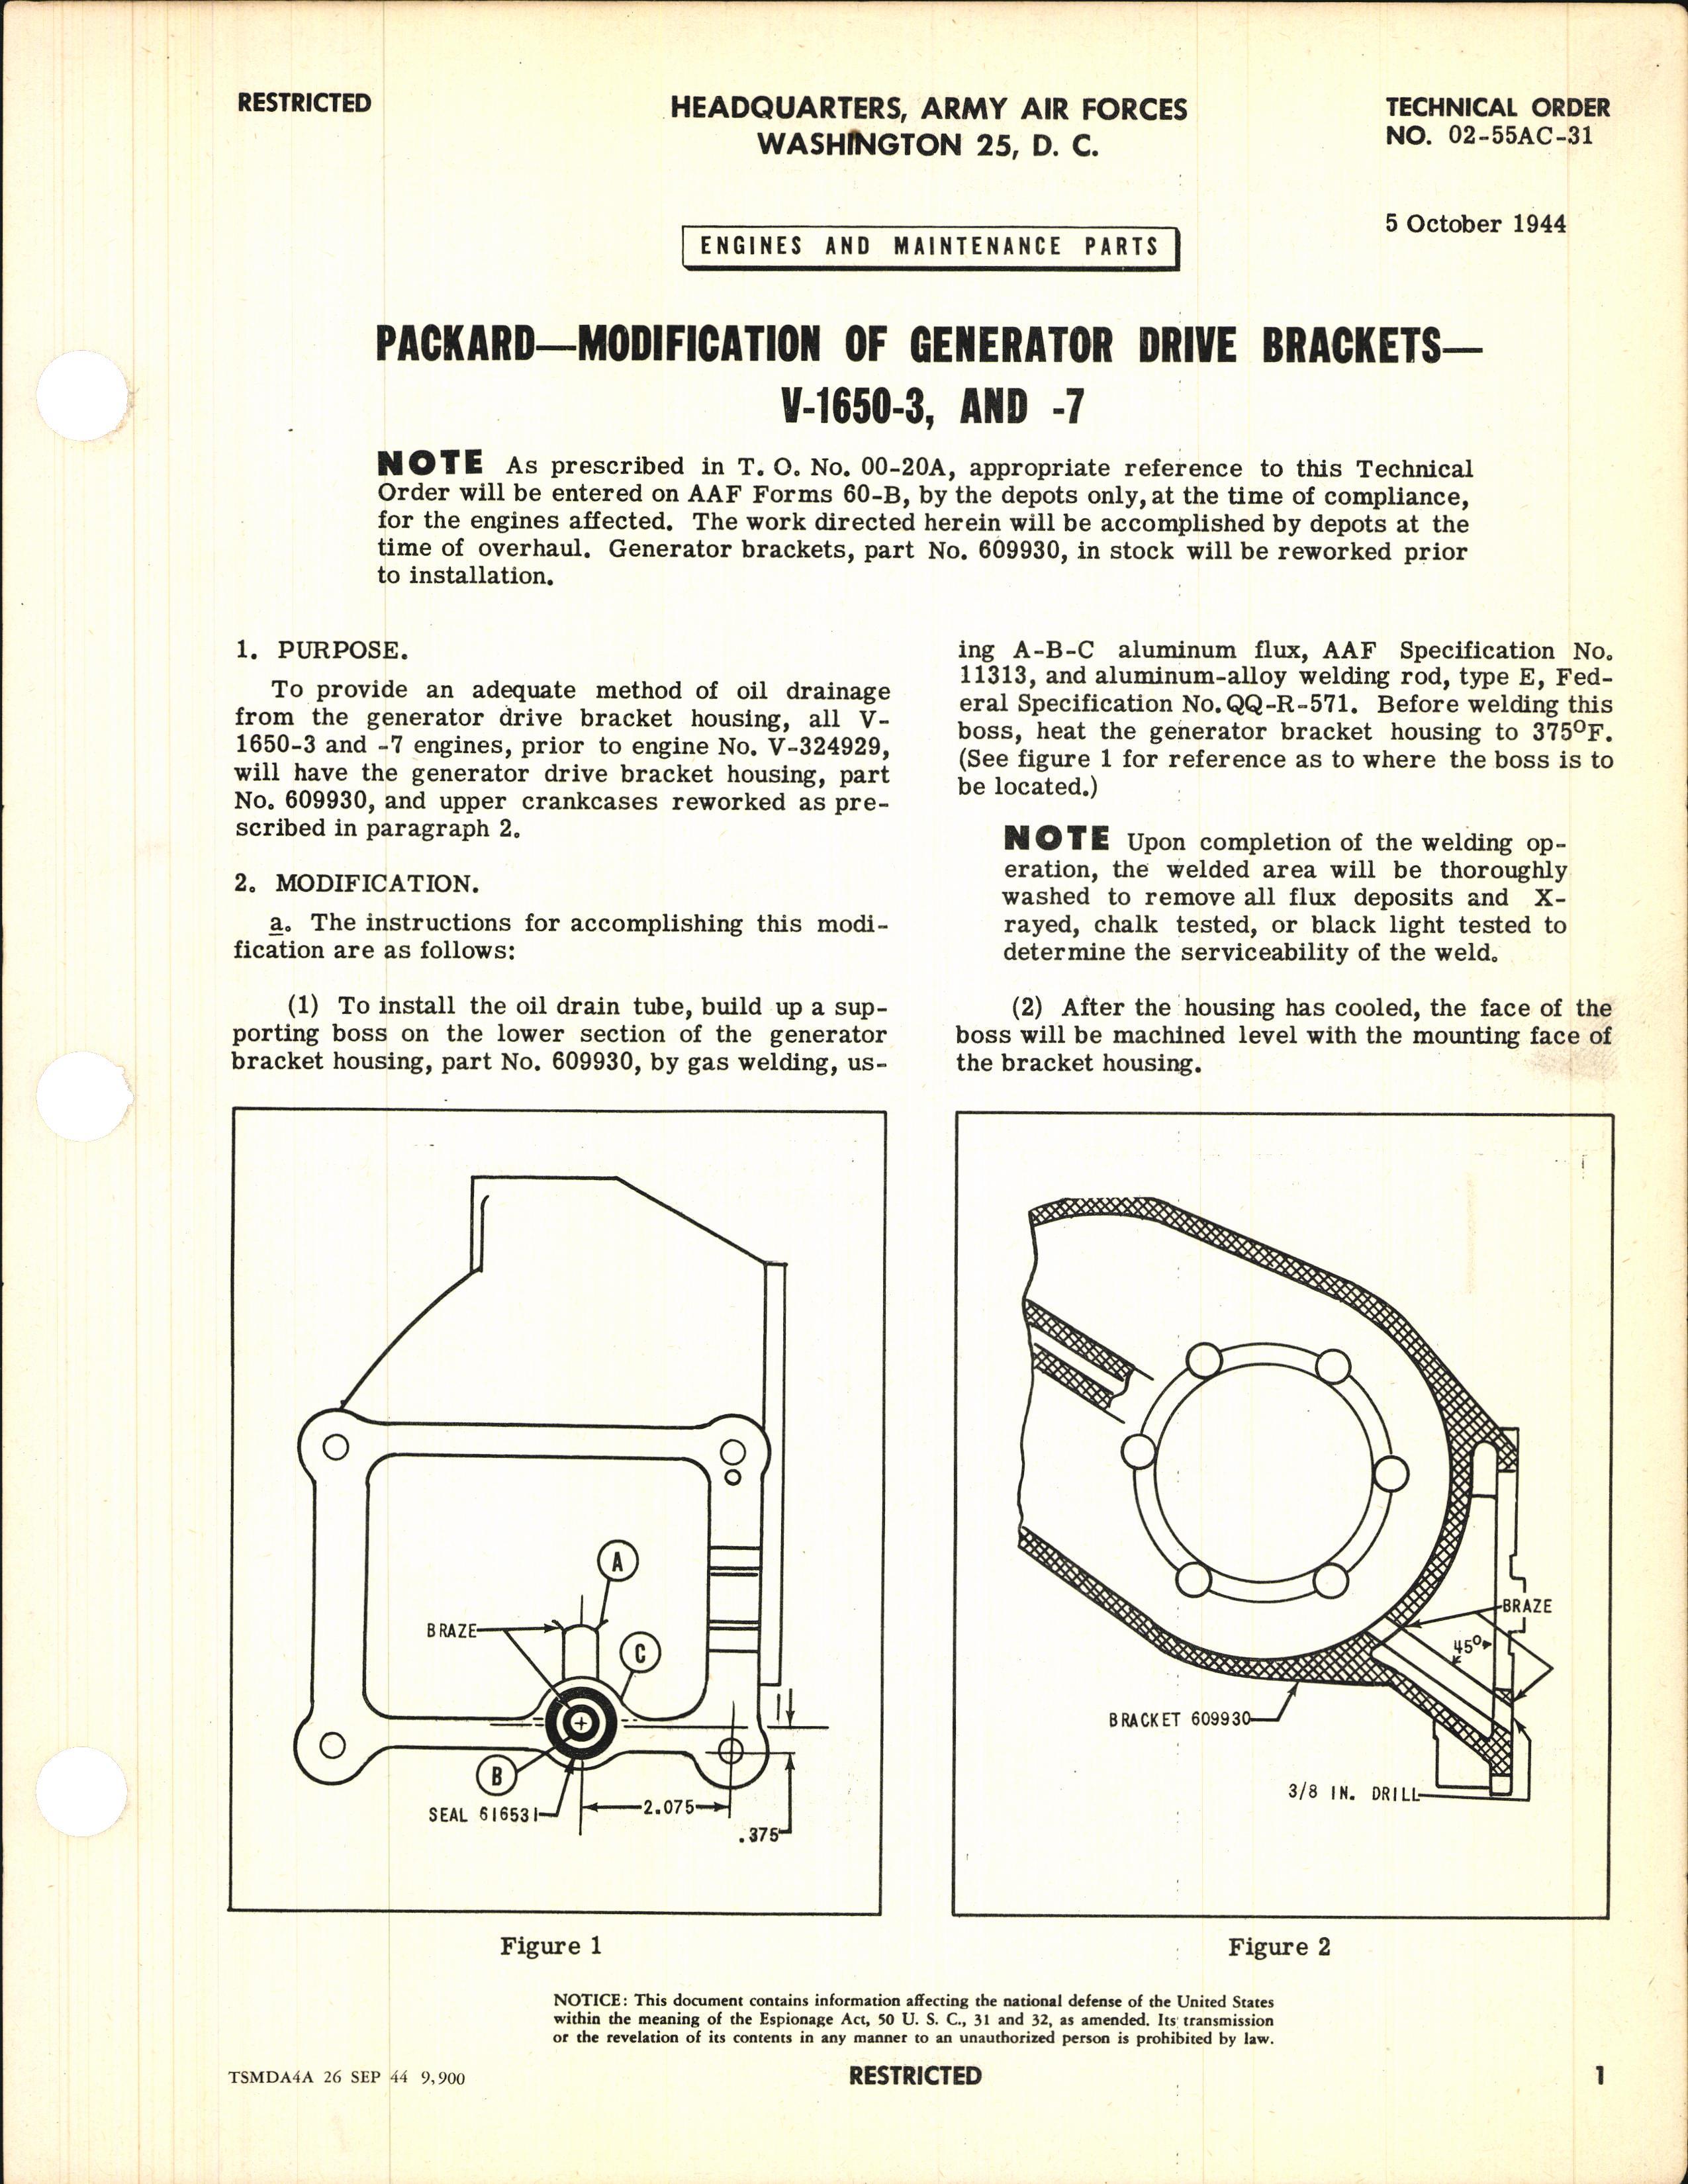 Sample page 1 from AirCorps Library document: Modification of Generator Drive Brackets for V-1650-3 and -7